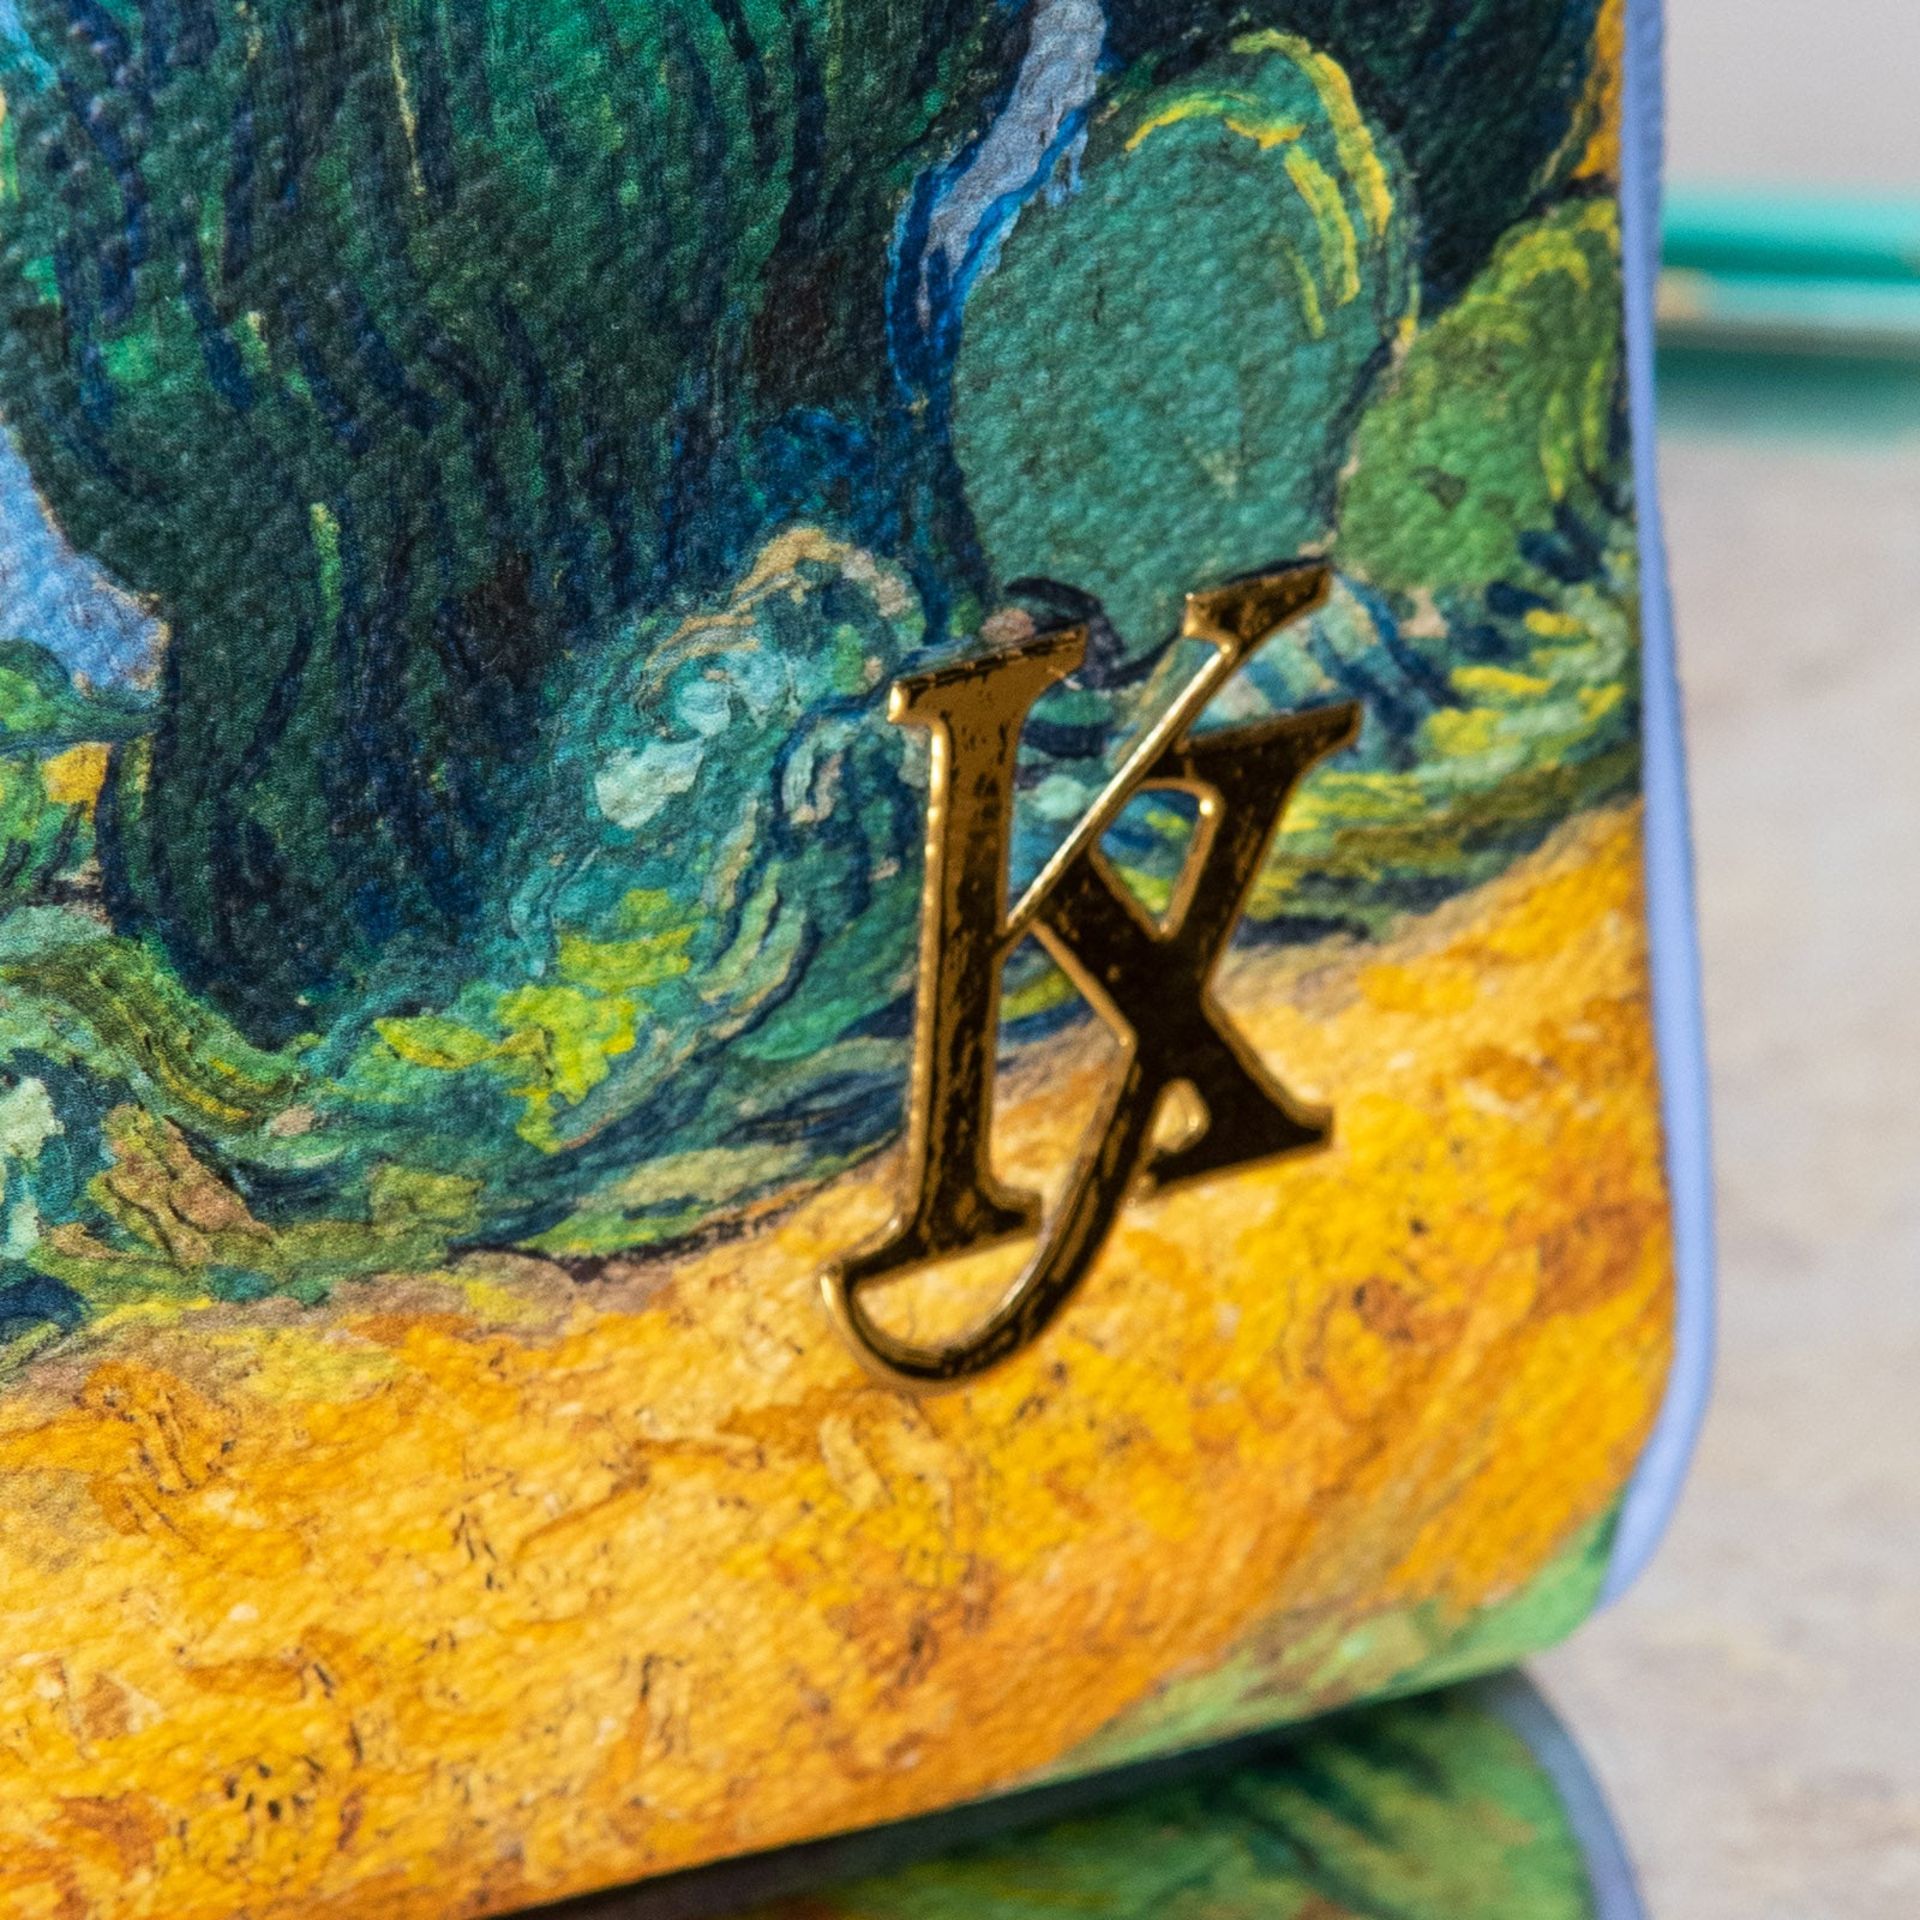 Louis Vuitton Limited Edition Lavender Speedy 30 Jeff Koons Van Gogh Masters Collection - Image 3 of 18